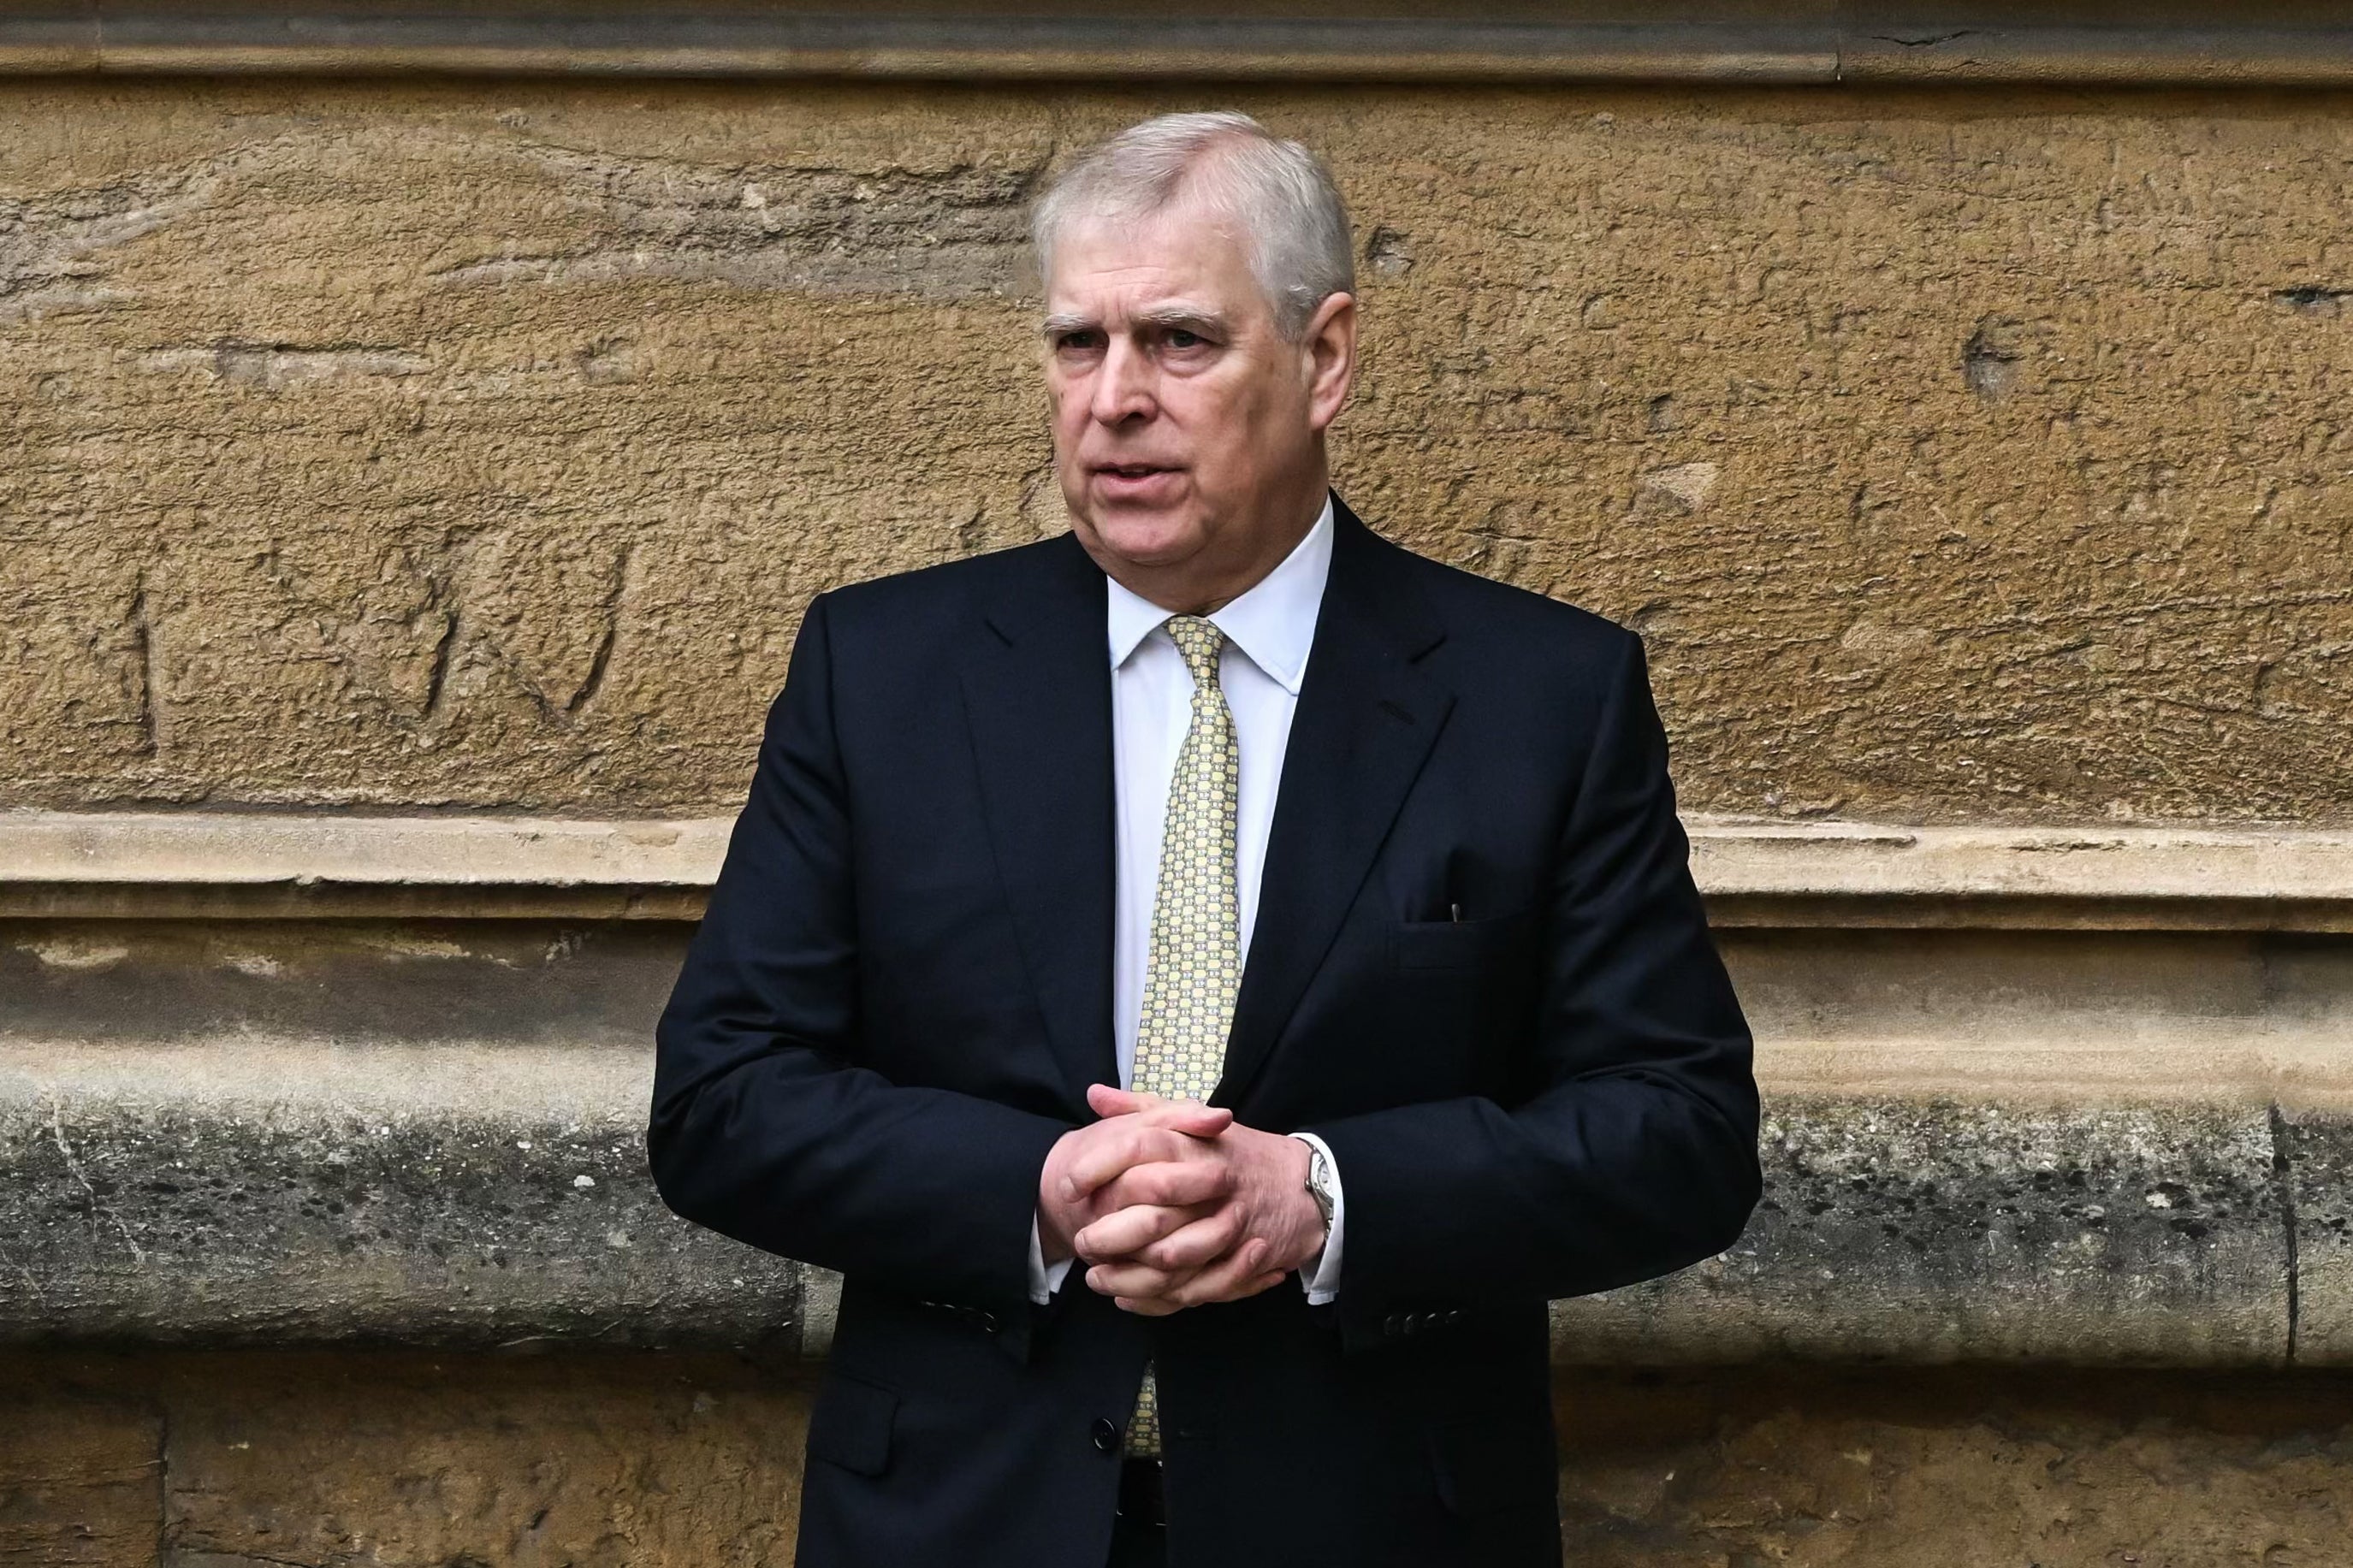 Prince Andrew was disgraced by his association with convicted peadophile Jeffrey Epstein.